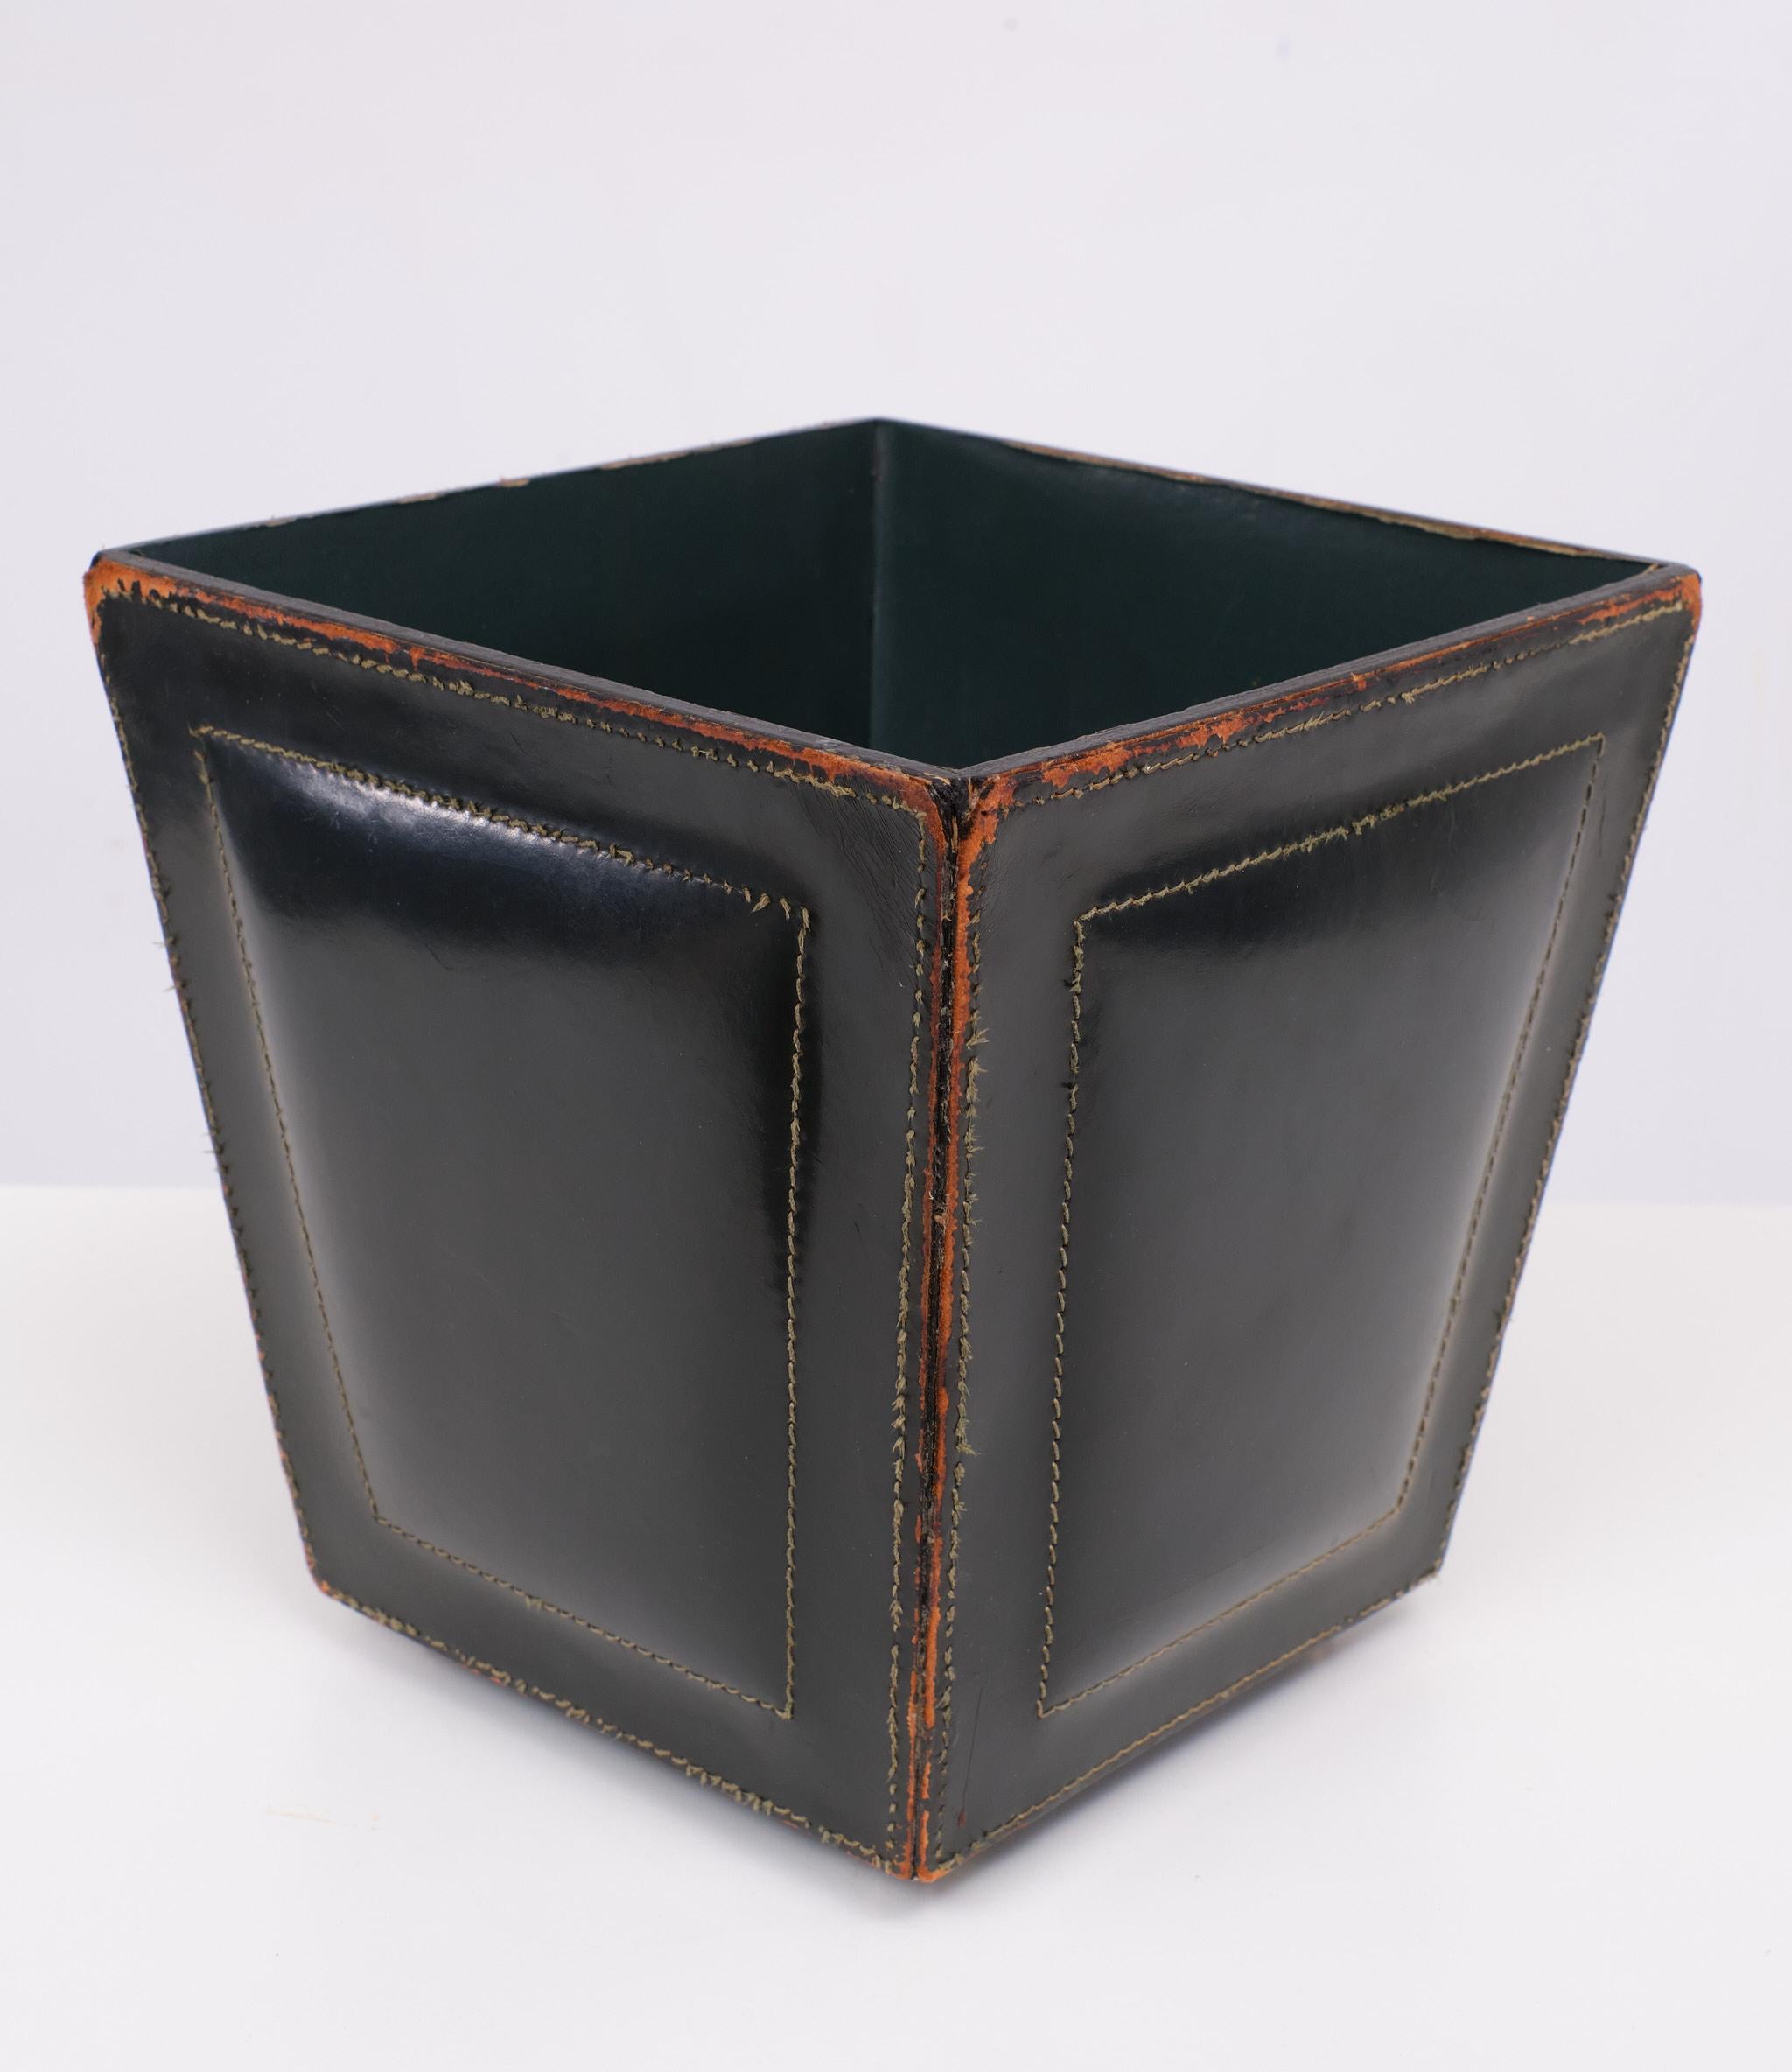 French Stich Leather waste basket attrib Jacques Adnet   1950s France  For Sale